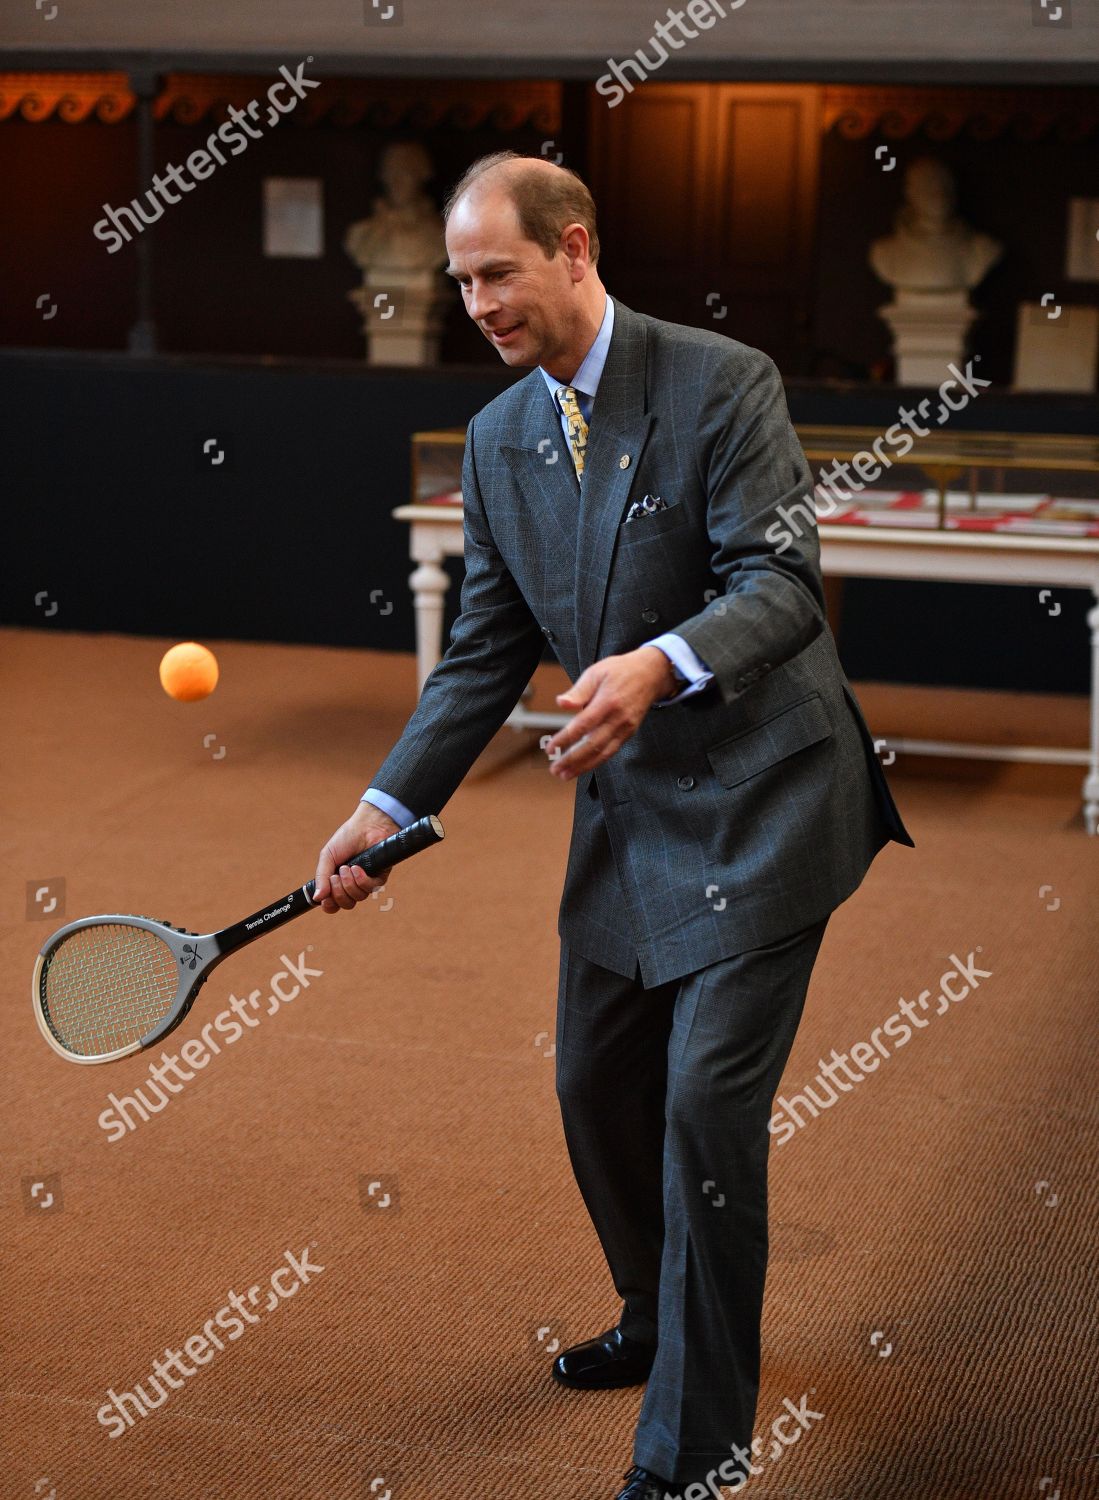 prince-edward-and-sophie-countess-of-wessex-visit-to-paris-france-shutterstock-editorial-9907868e.jpg